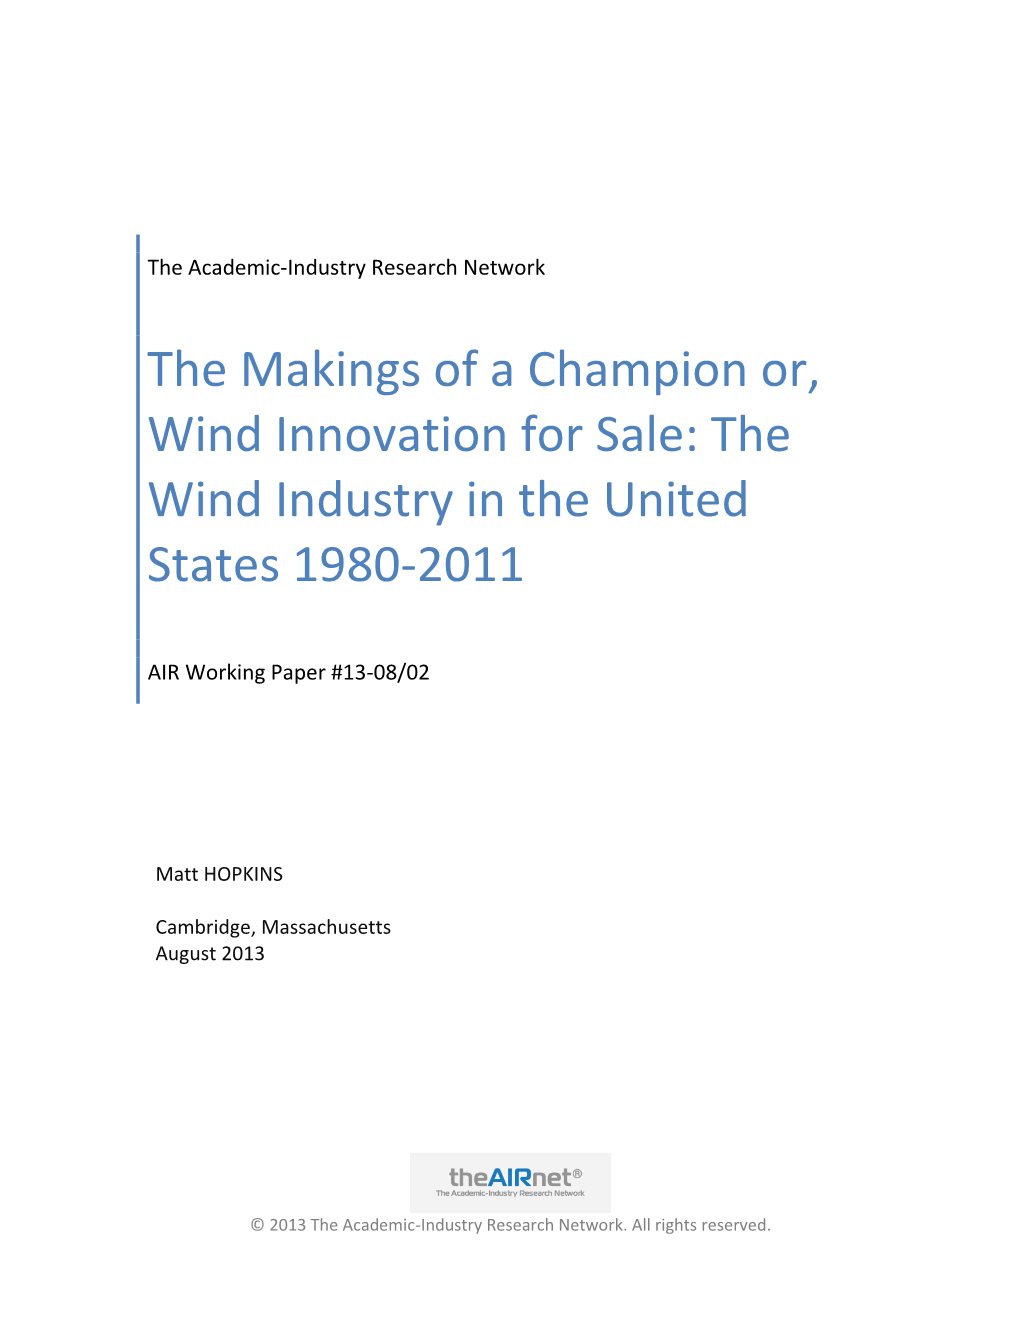 T Help from Federal and State Agencies to Help Resolve the Problem but Were Ultimately Widely Condemned As Mass Slaughterers of Birds” (Windpoweringamerica.Gov, 2003)